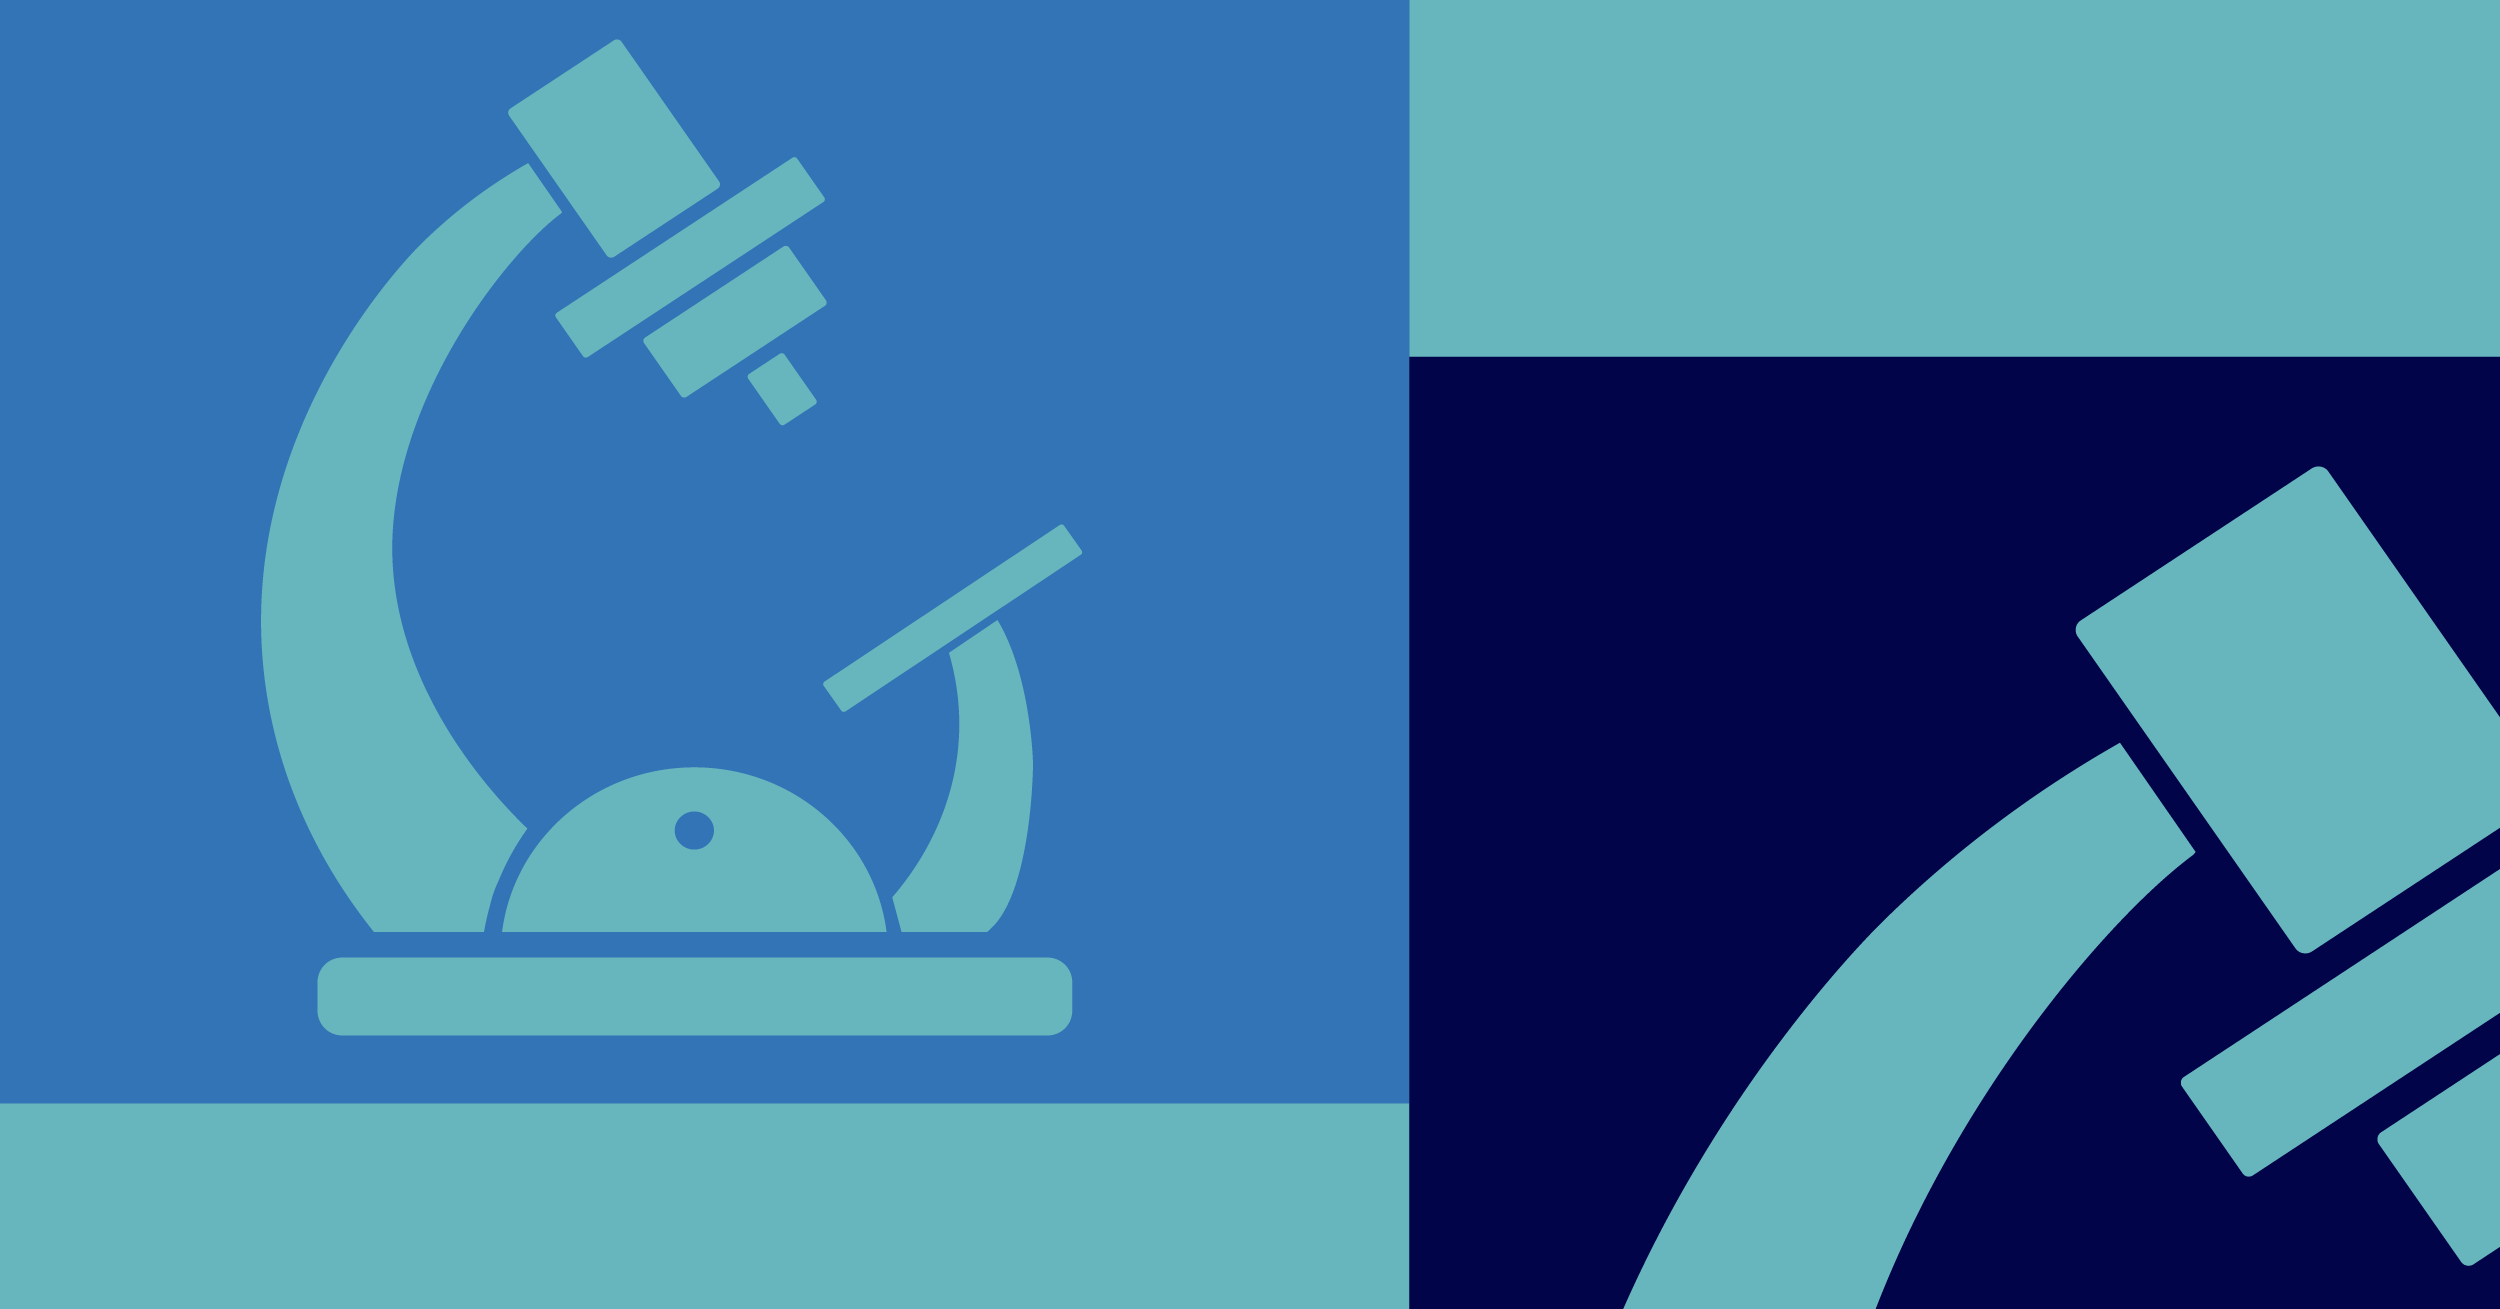 Illustration of a teal microscope outlined in blue and part of a second teal microscope outlined in black in front of a teal background depicting the biotechnology industry